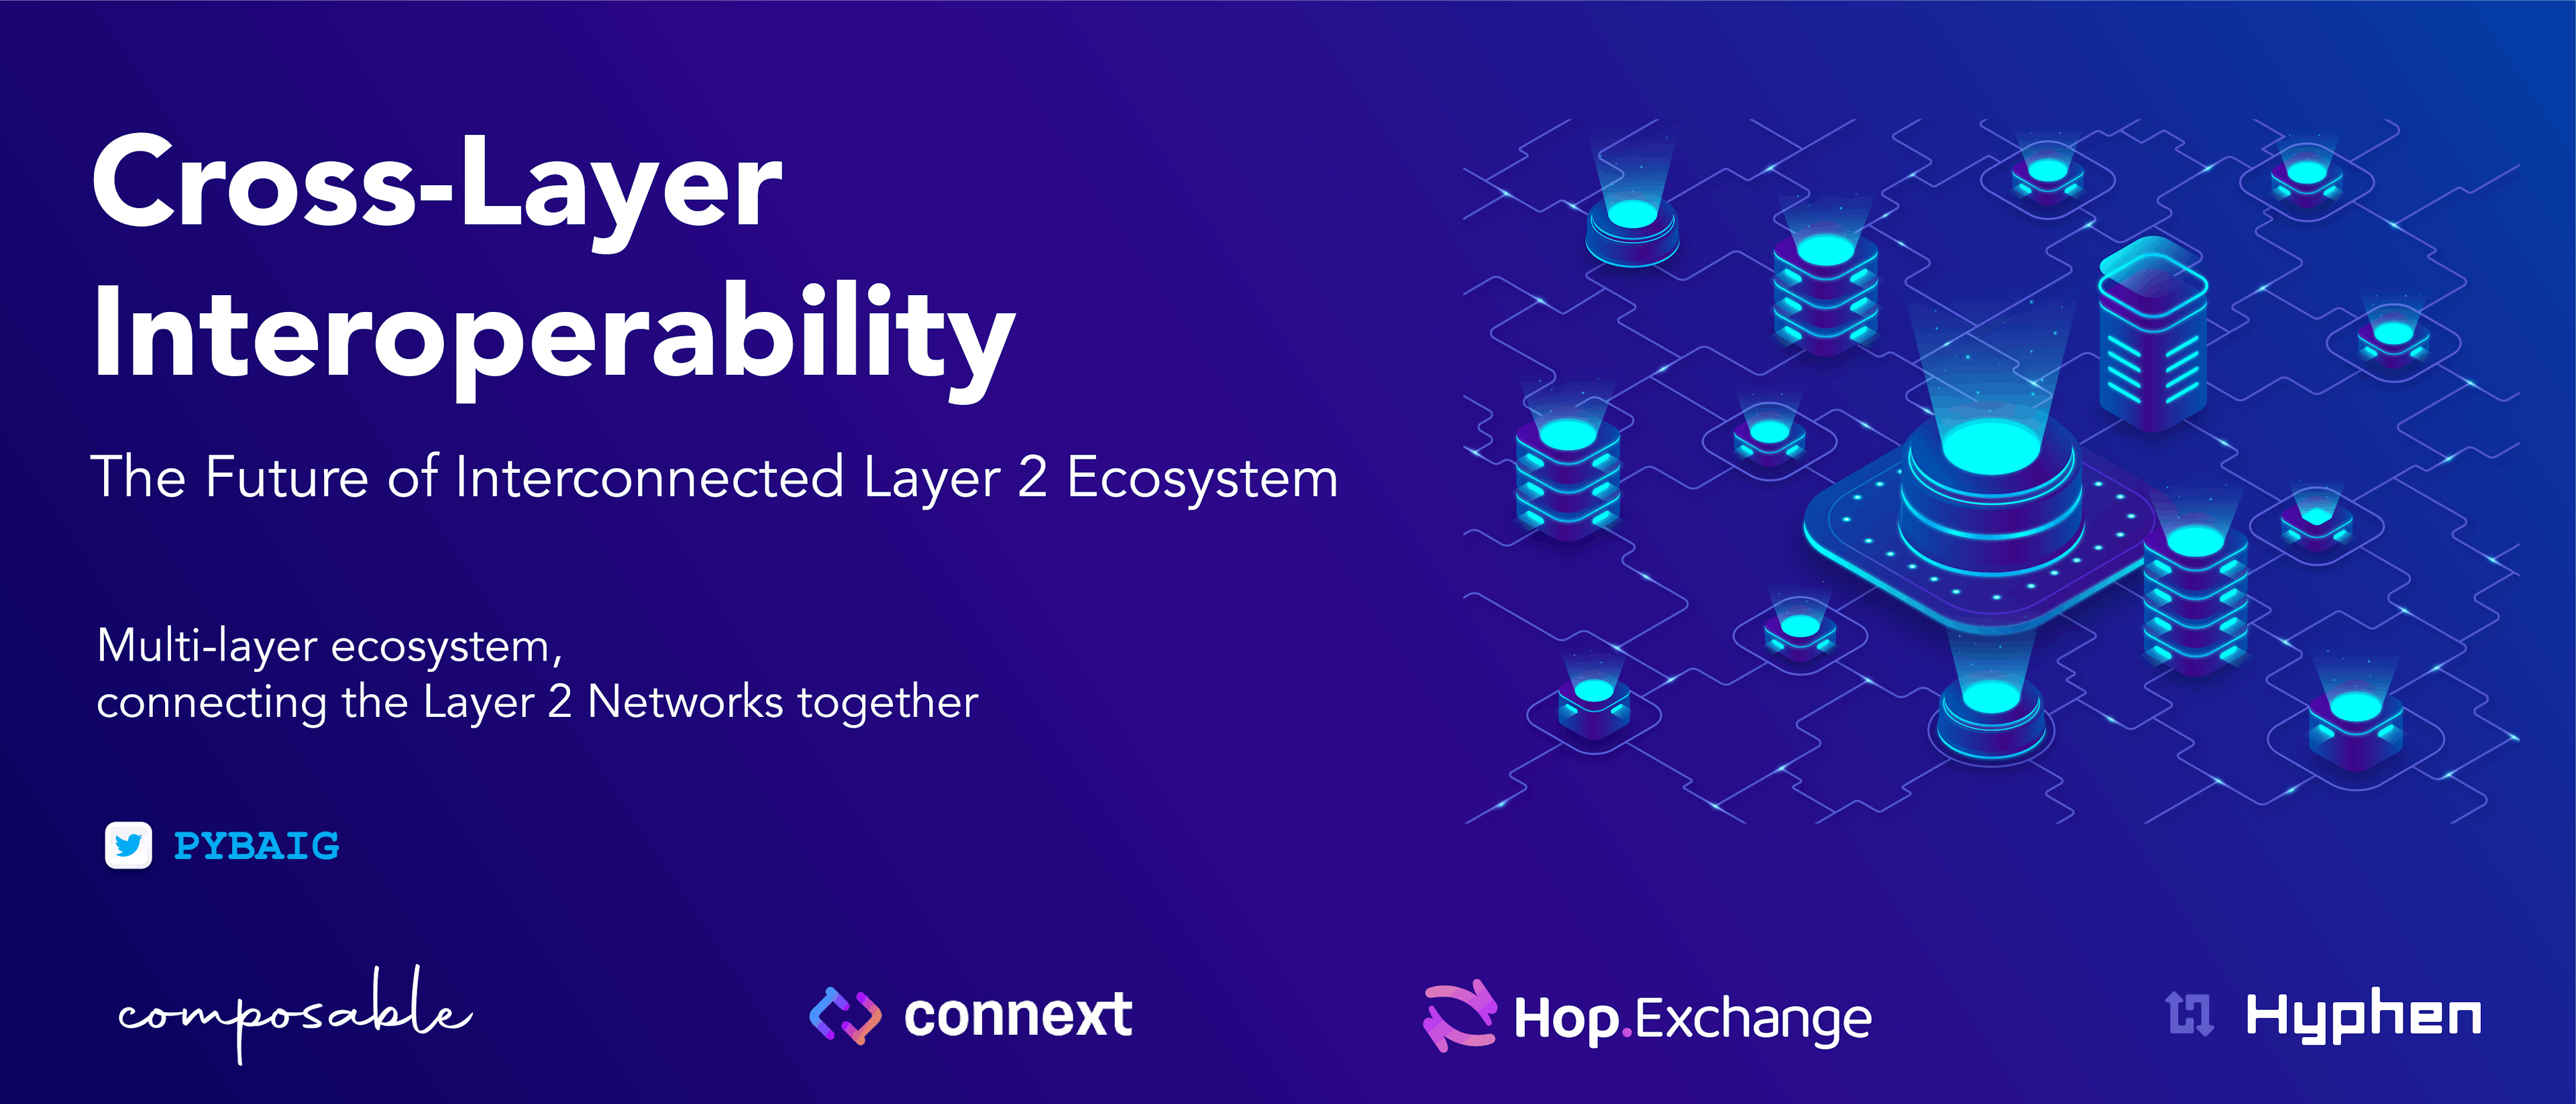 featured image - Cross-layer Interoperability: The Future Of Interconnected Layer 2 Ecosystem